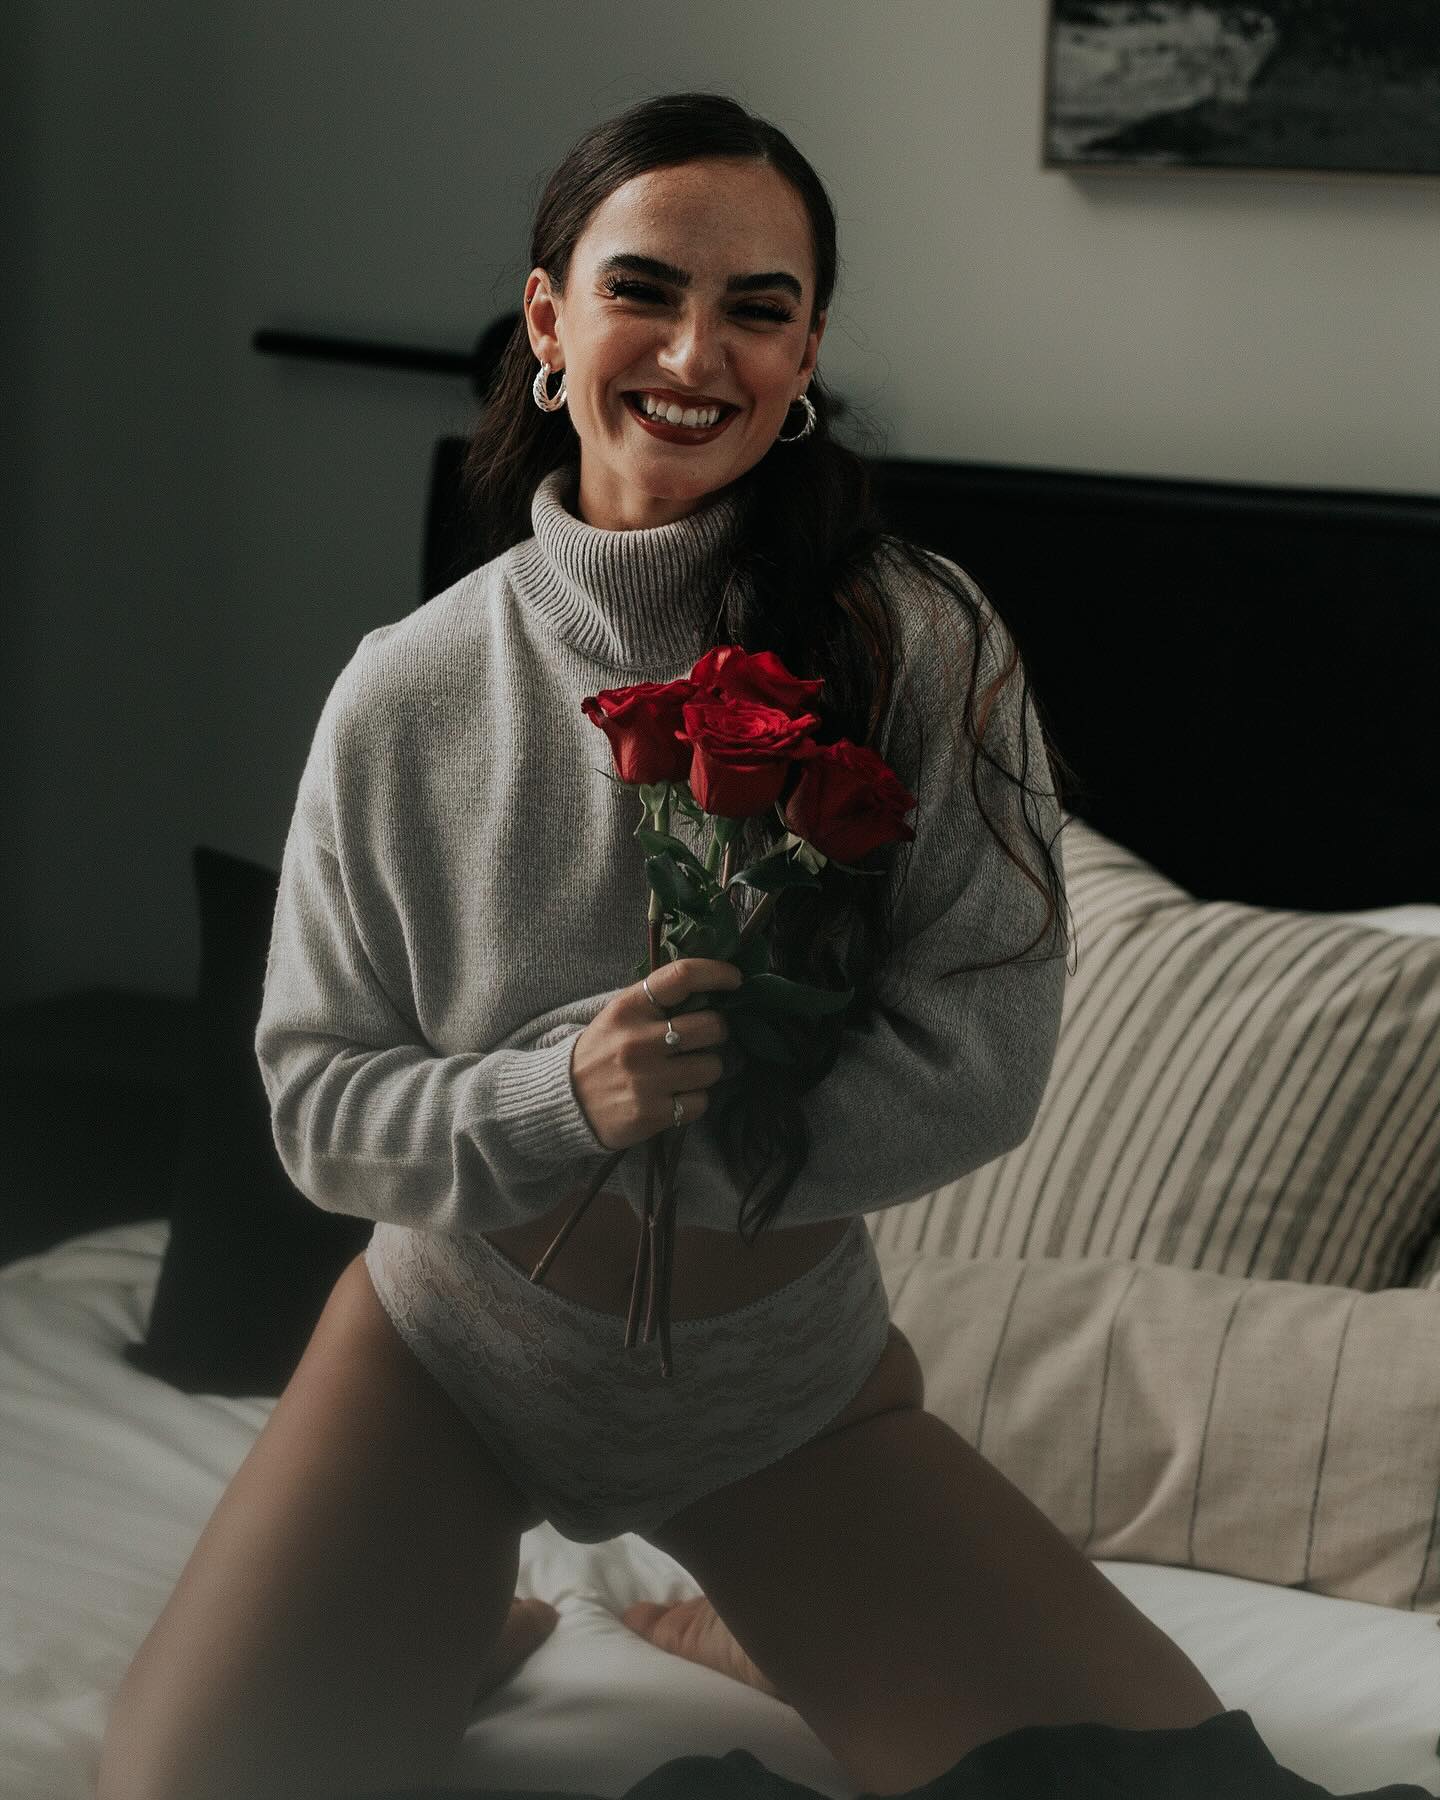 Happy Valentine’s Day….. just remember the best love is the love you give yourself💋🌹

•
•
•
•
•
•

•
•
#boudoir #boudoirphotography #intimacy #sensual #model #photography #portrait #boudoirphotographer #photoshoot #boudoirinspiration #beauty #photooftheday #boudoirshoot #art #portraitphotography #beautiful #fashion #glamour #couplesboudoir #boudoirmodel #photographer #love #modeling #portraits #sensuality #instagood #boudoirphotoshoot #boudoirphotos